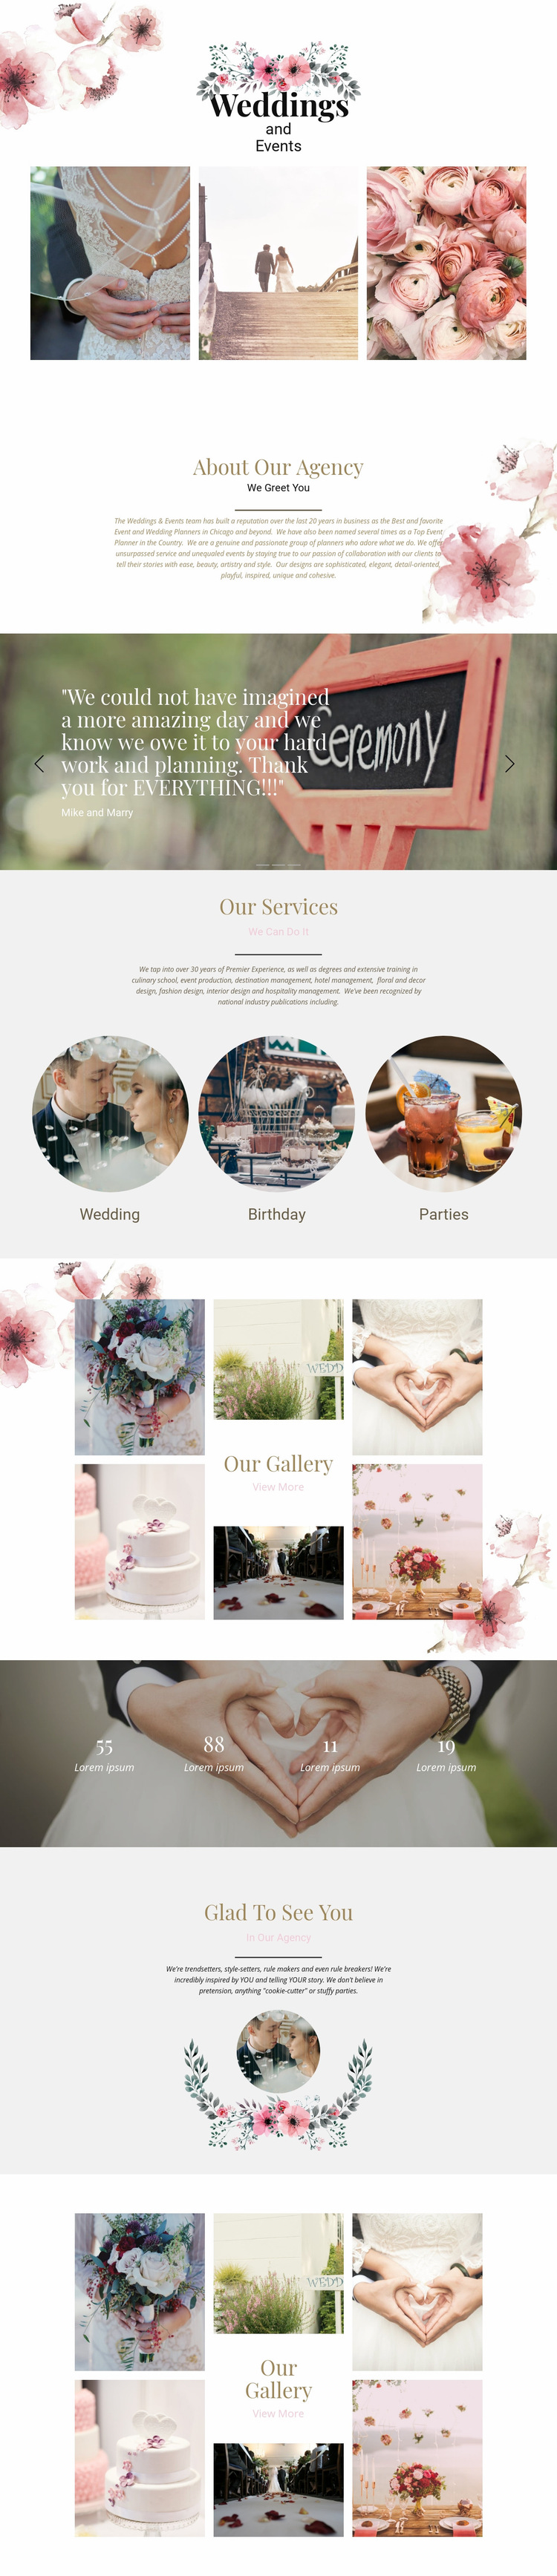 Moments of wedding Web Page Design